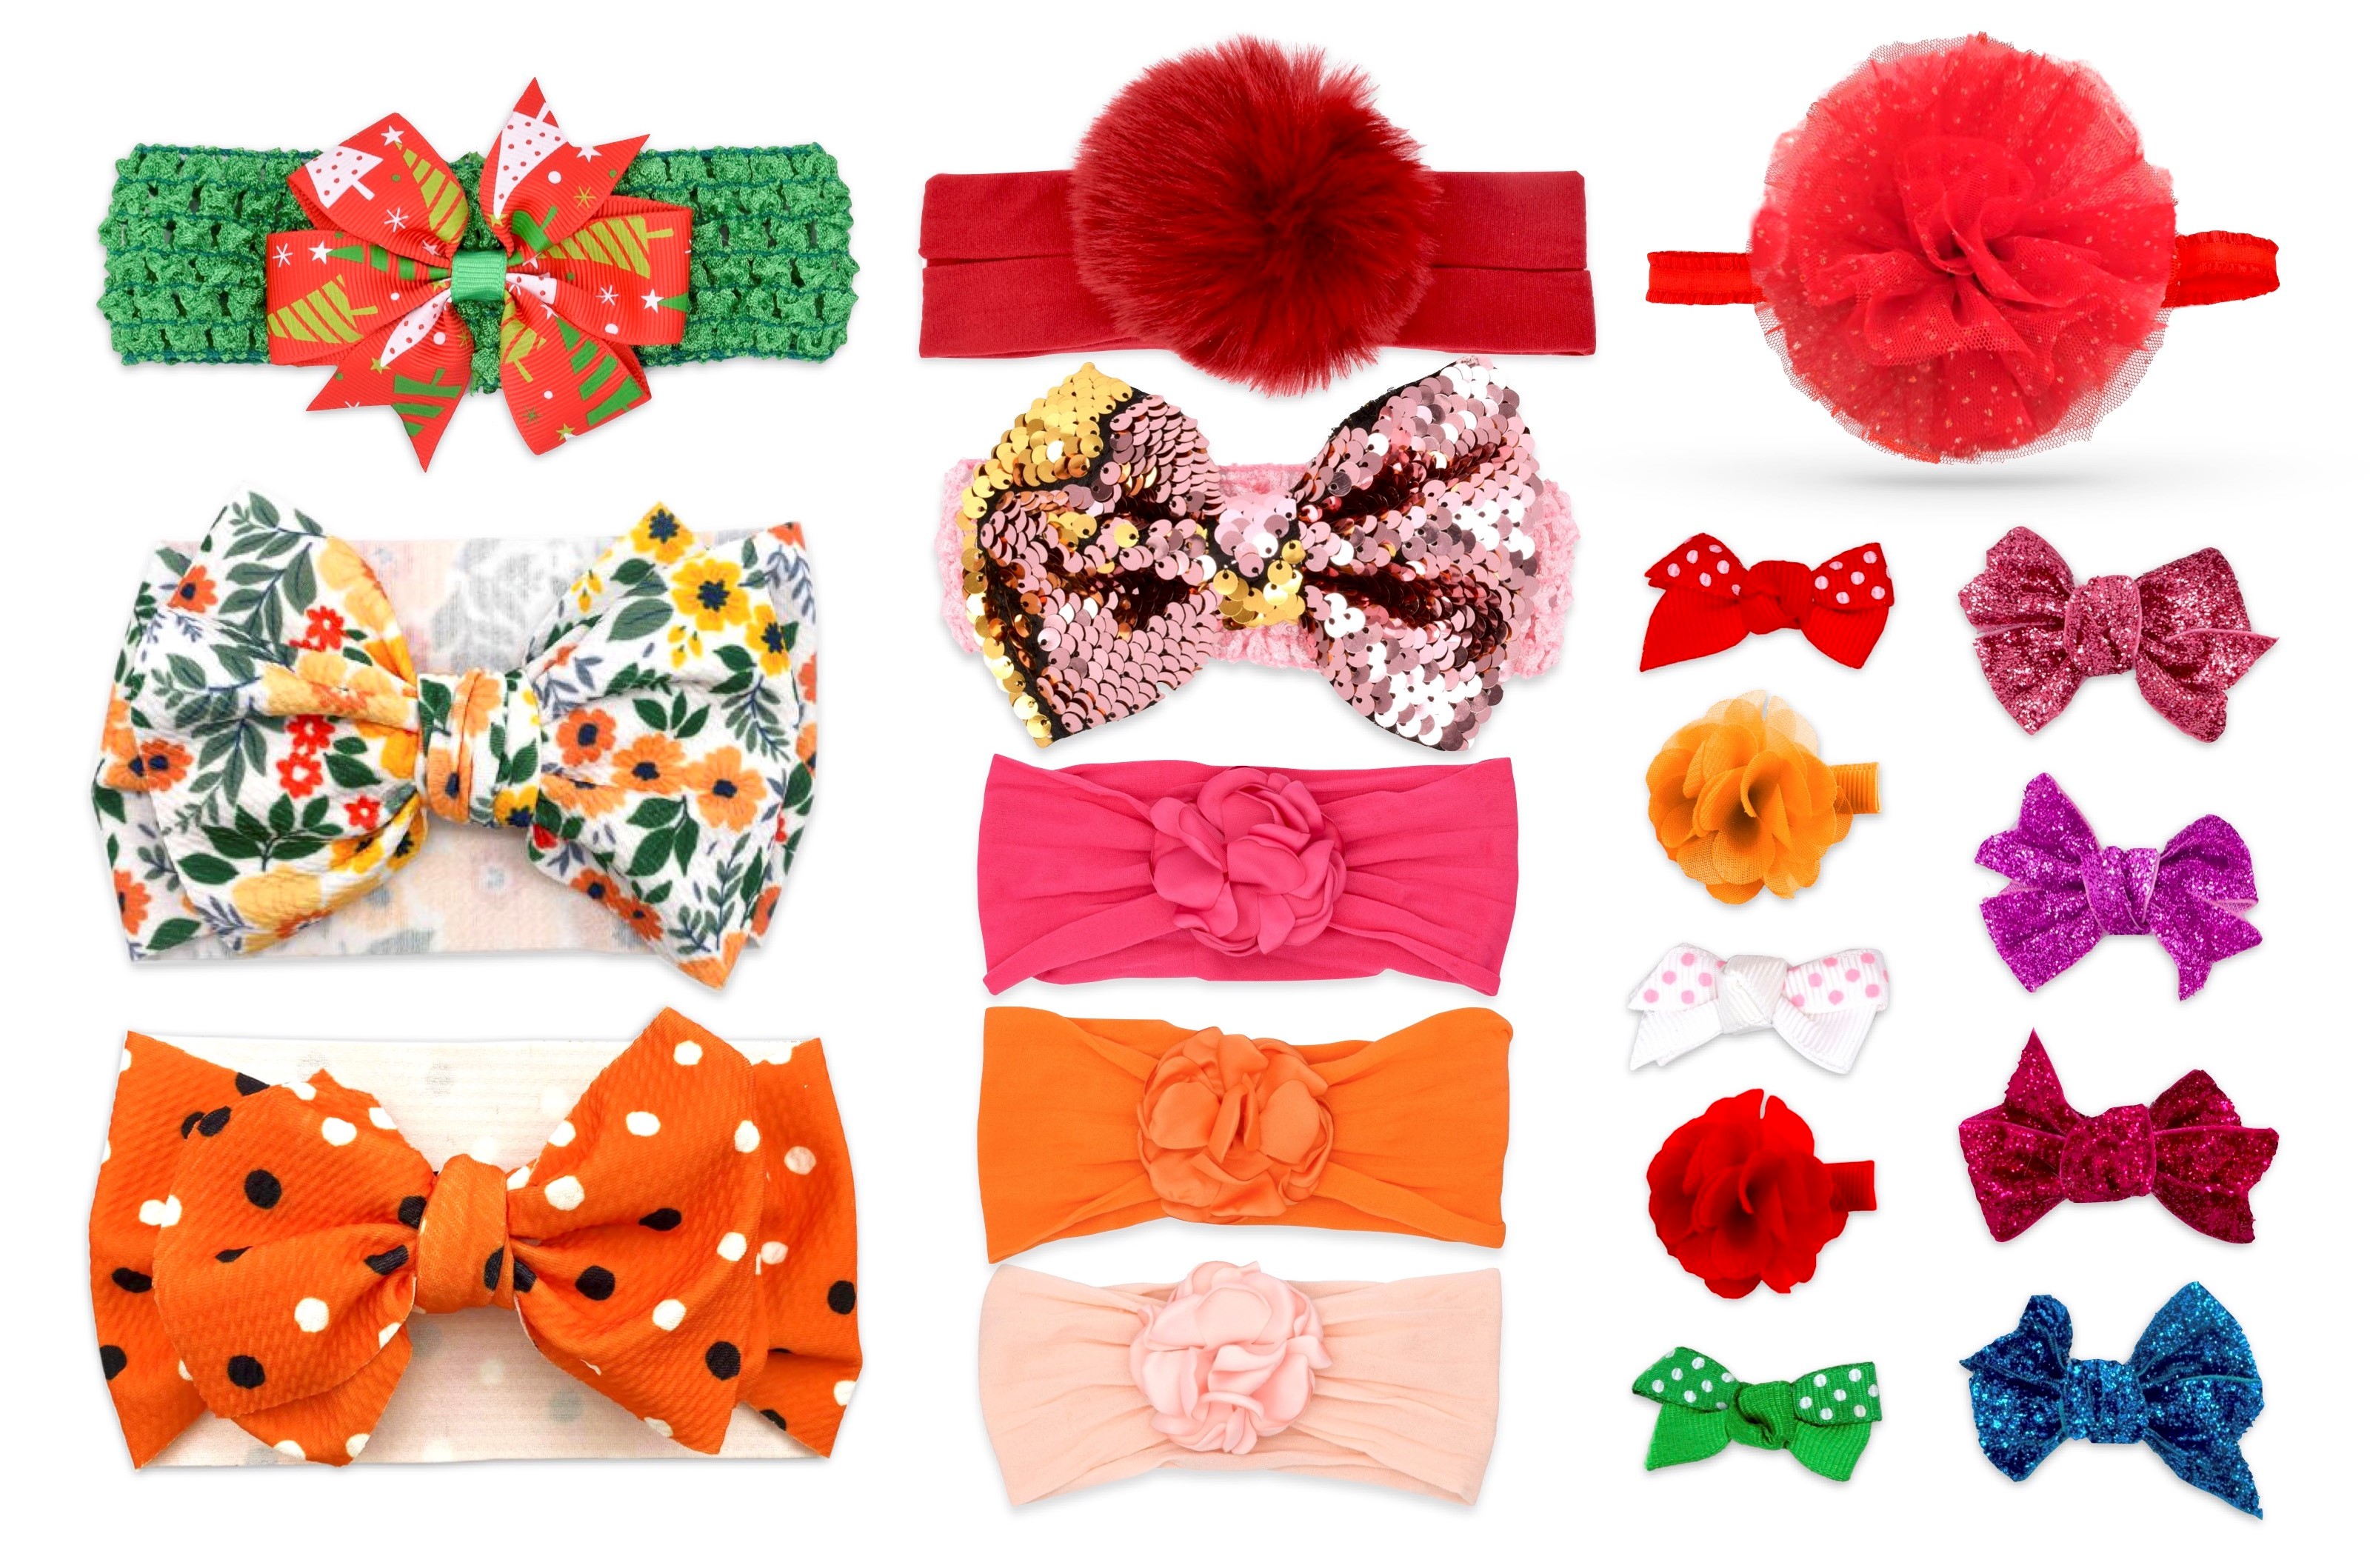 Khristie® Baby & Toddler Autumn 18PC Hair Accessory Assortment - image 1 of 7